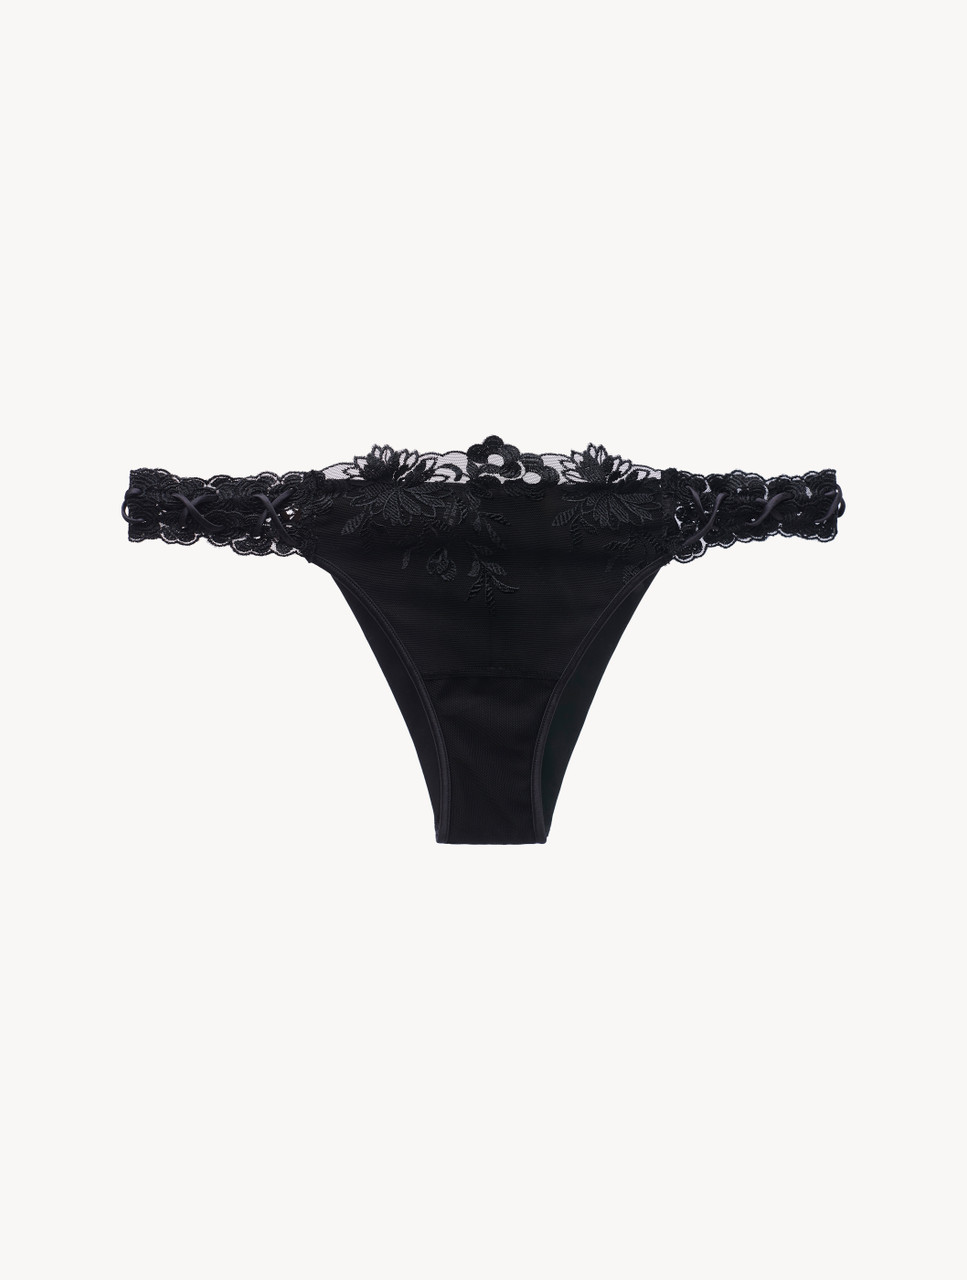 Brazilian Brief in Black Lycra with embroidered tulle